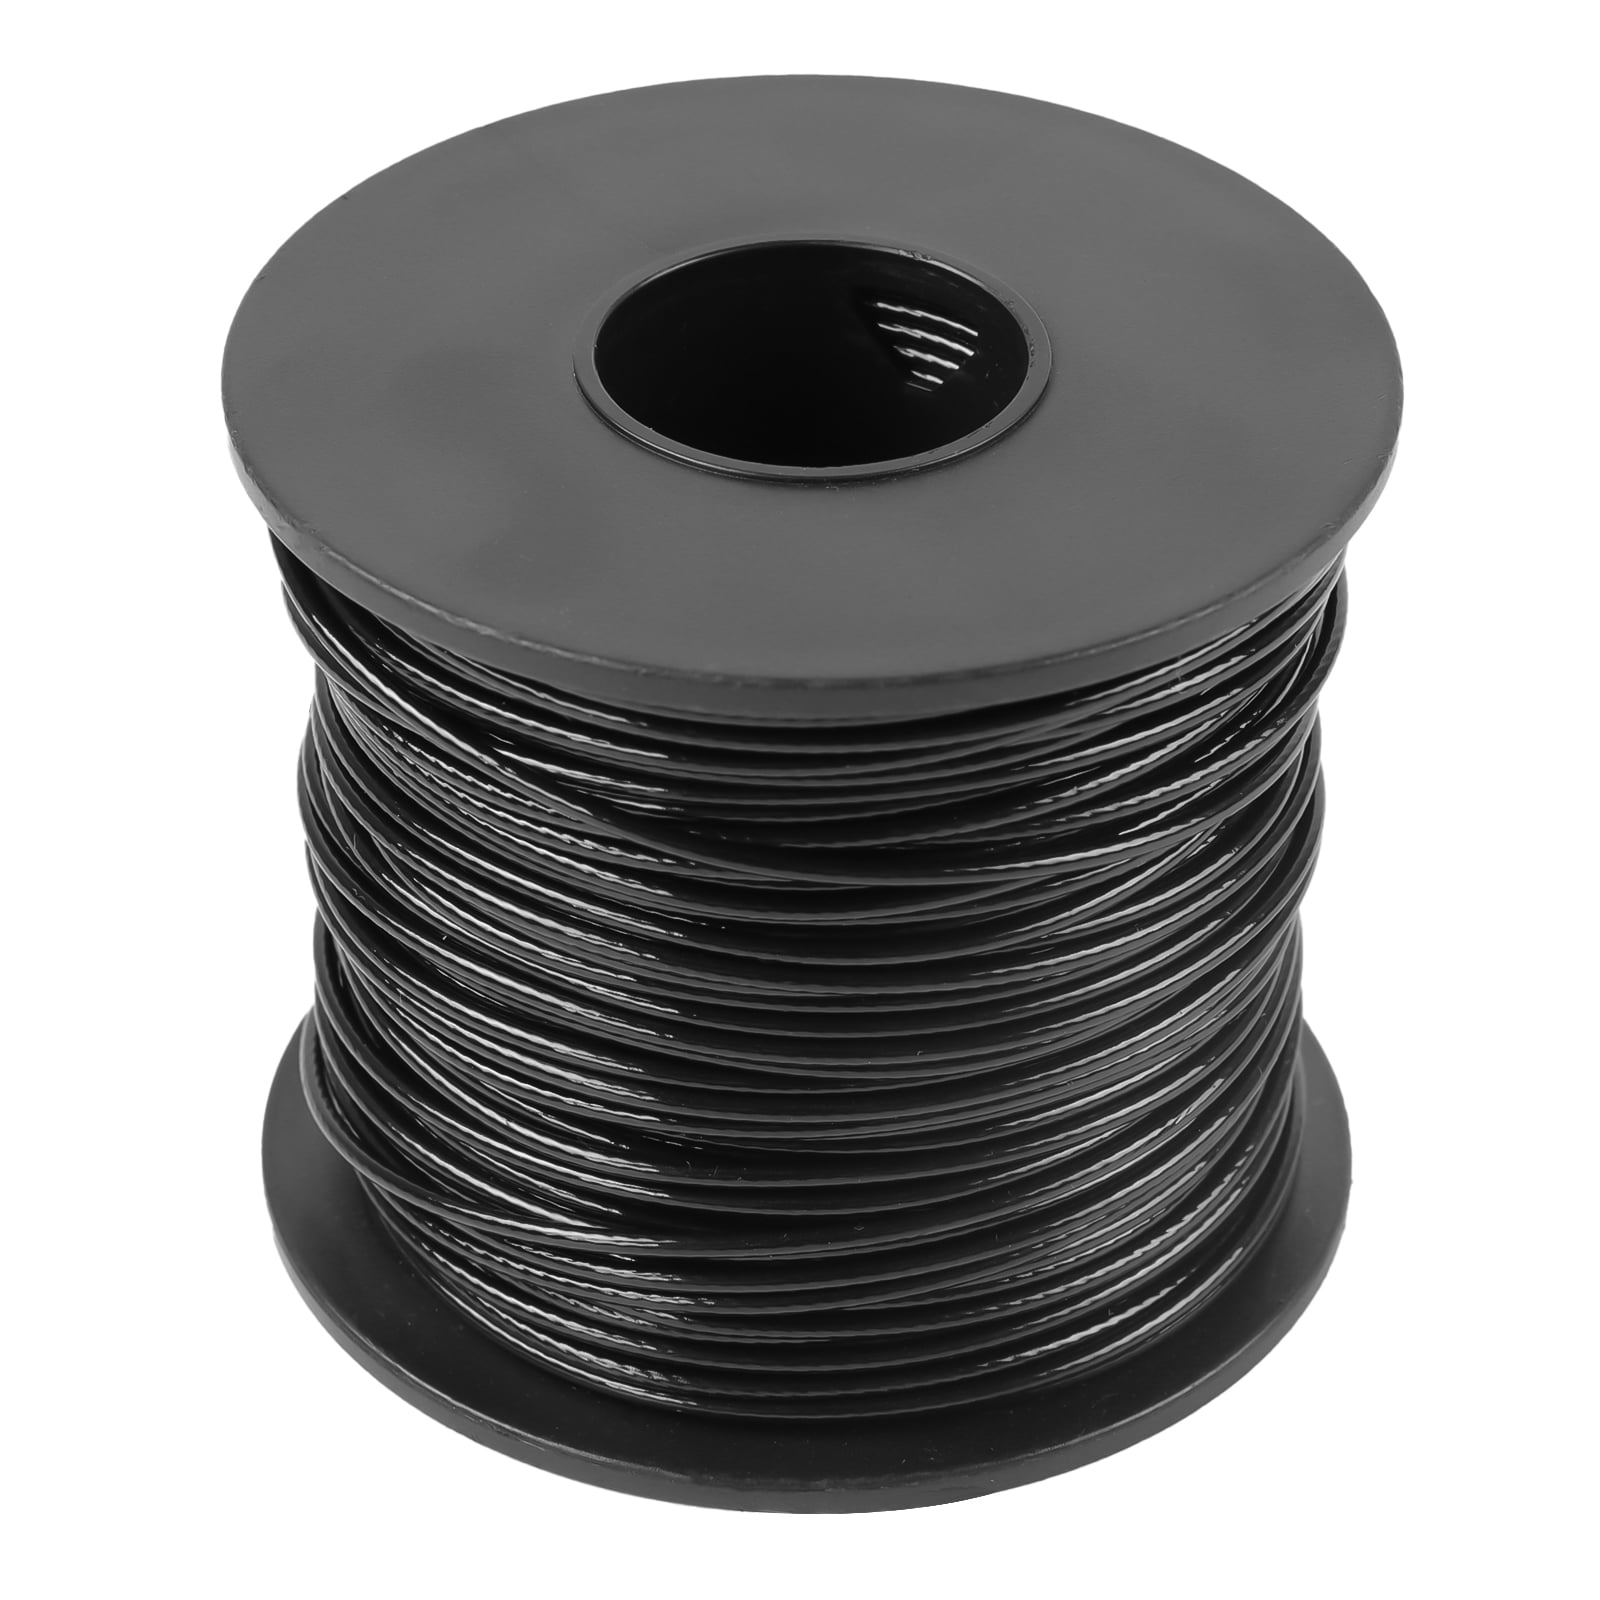 1/16 Coated to 3/32 Diameter 100 ft Coil 7x7 Construction Black Vinyl Coated Cable 